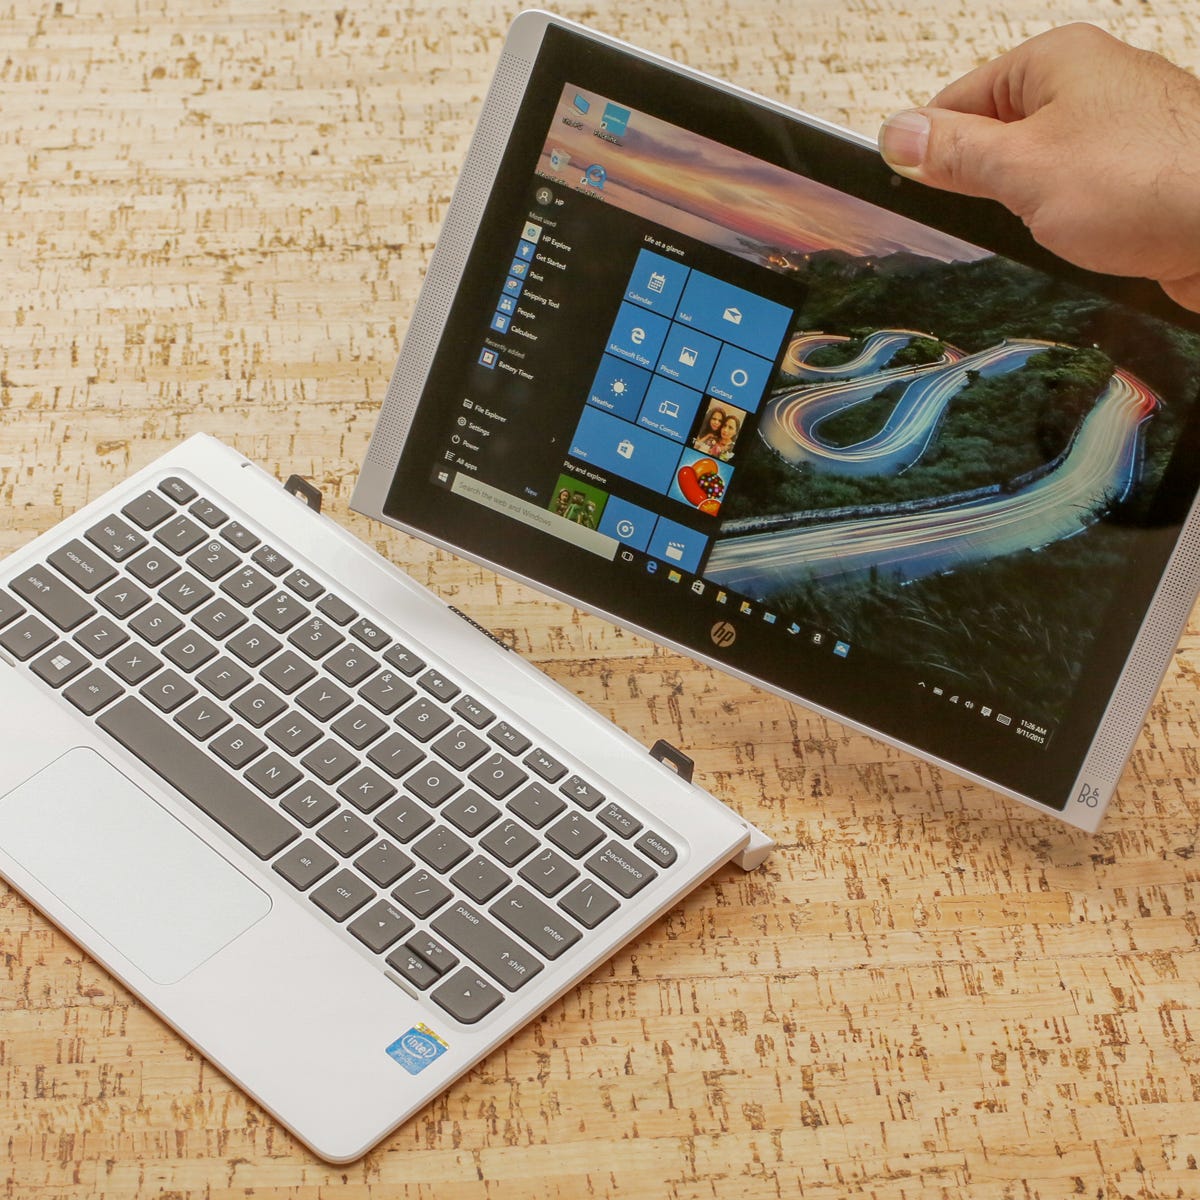 HP Pavilion x2 (2015) review: A sharp-looking hybrid PC that overpromises - CNET